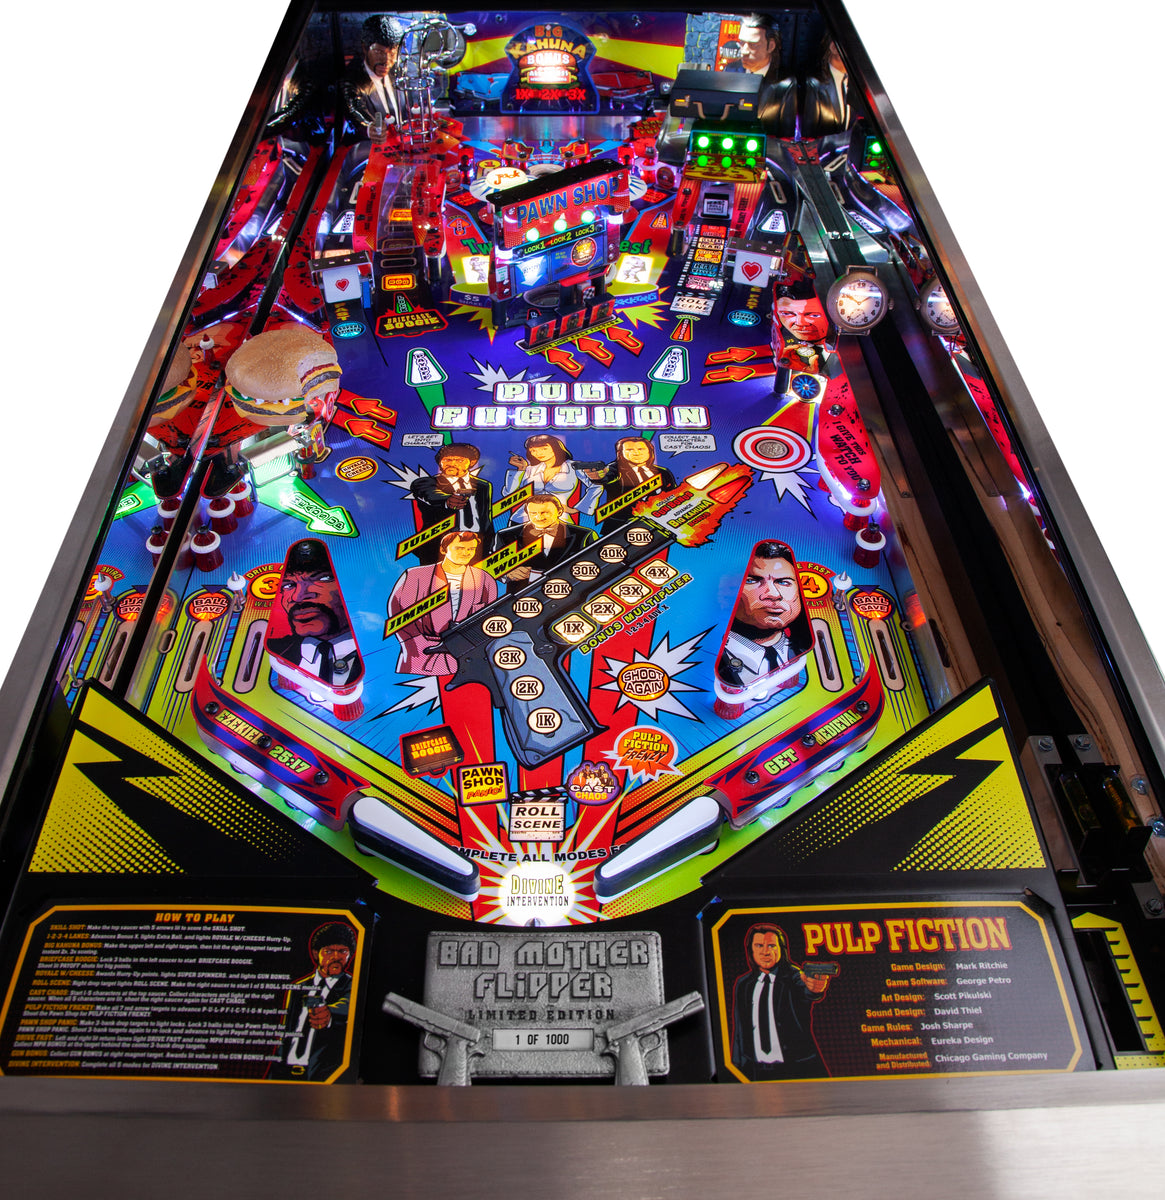 PRE-ORDER PULP FICTION SPECIAL EDITION Pinball Machine by Chicago Gaming  Company - DEPOSIT ONLY